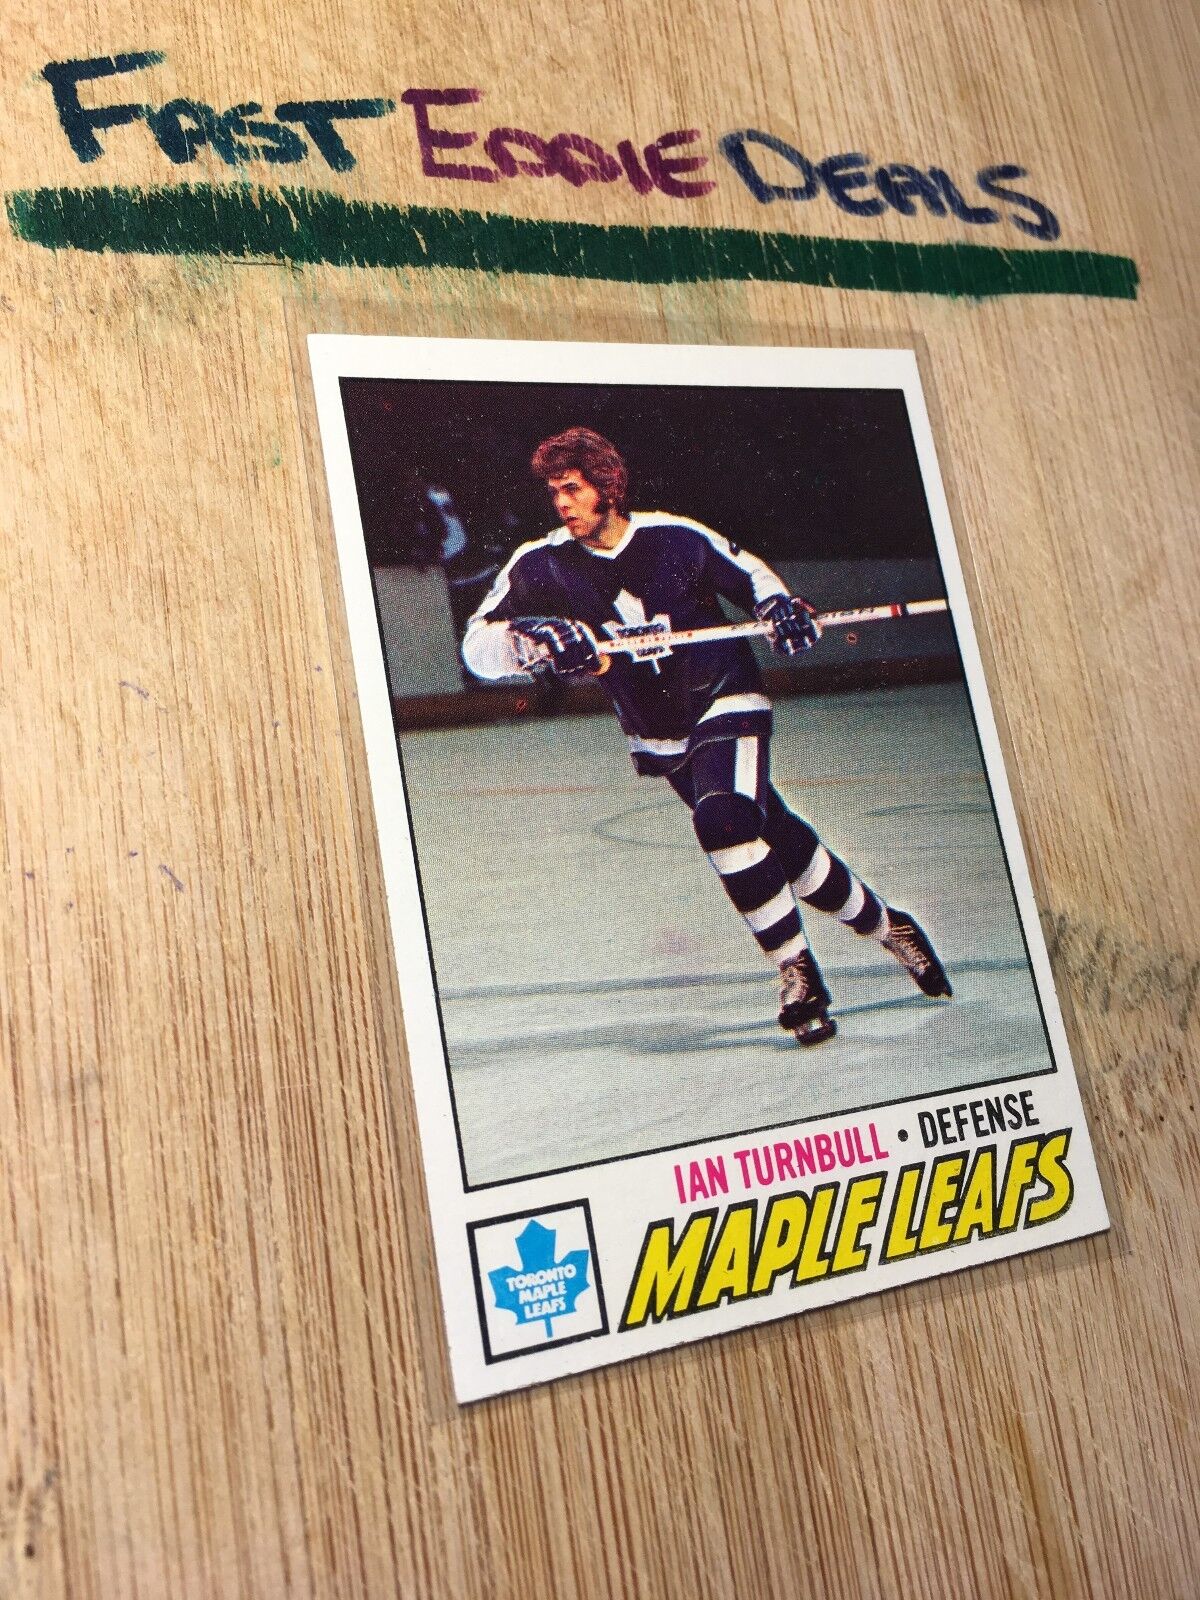 TOPPS HOCKEY 1977-78 IAN TURNBULL CARD # 186 TORONTO MAPLE LEAFS EXCELLENT